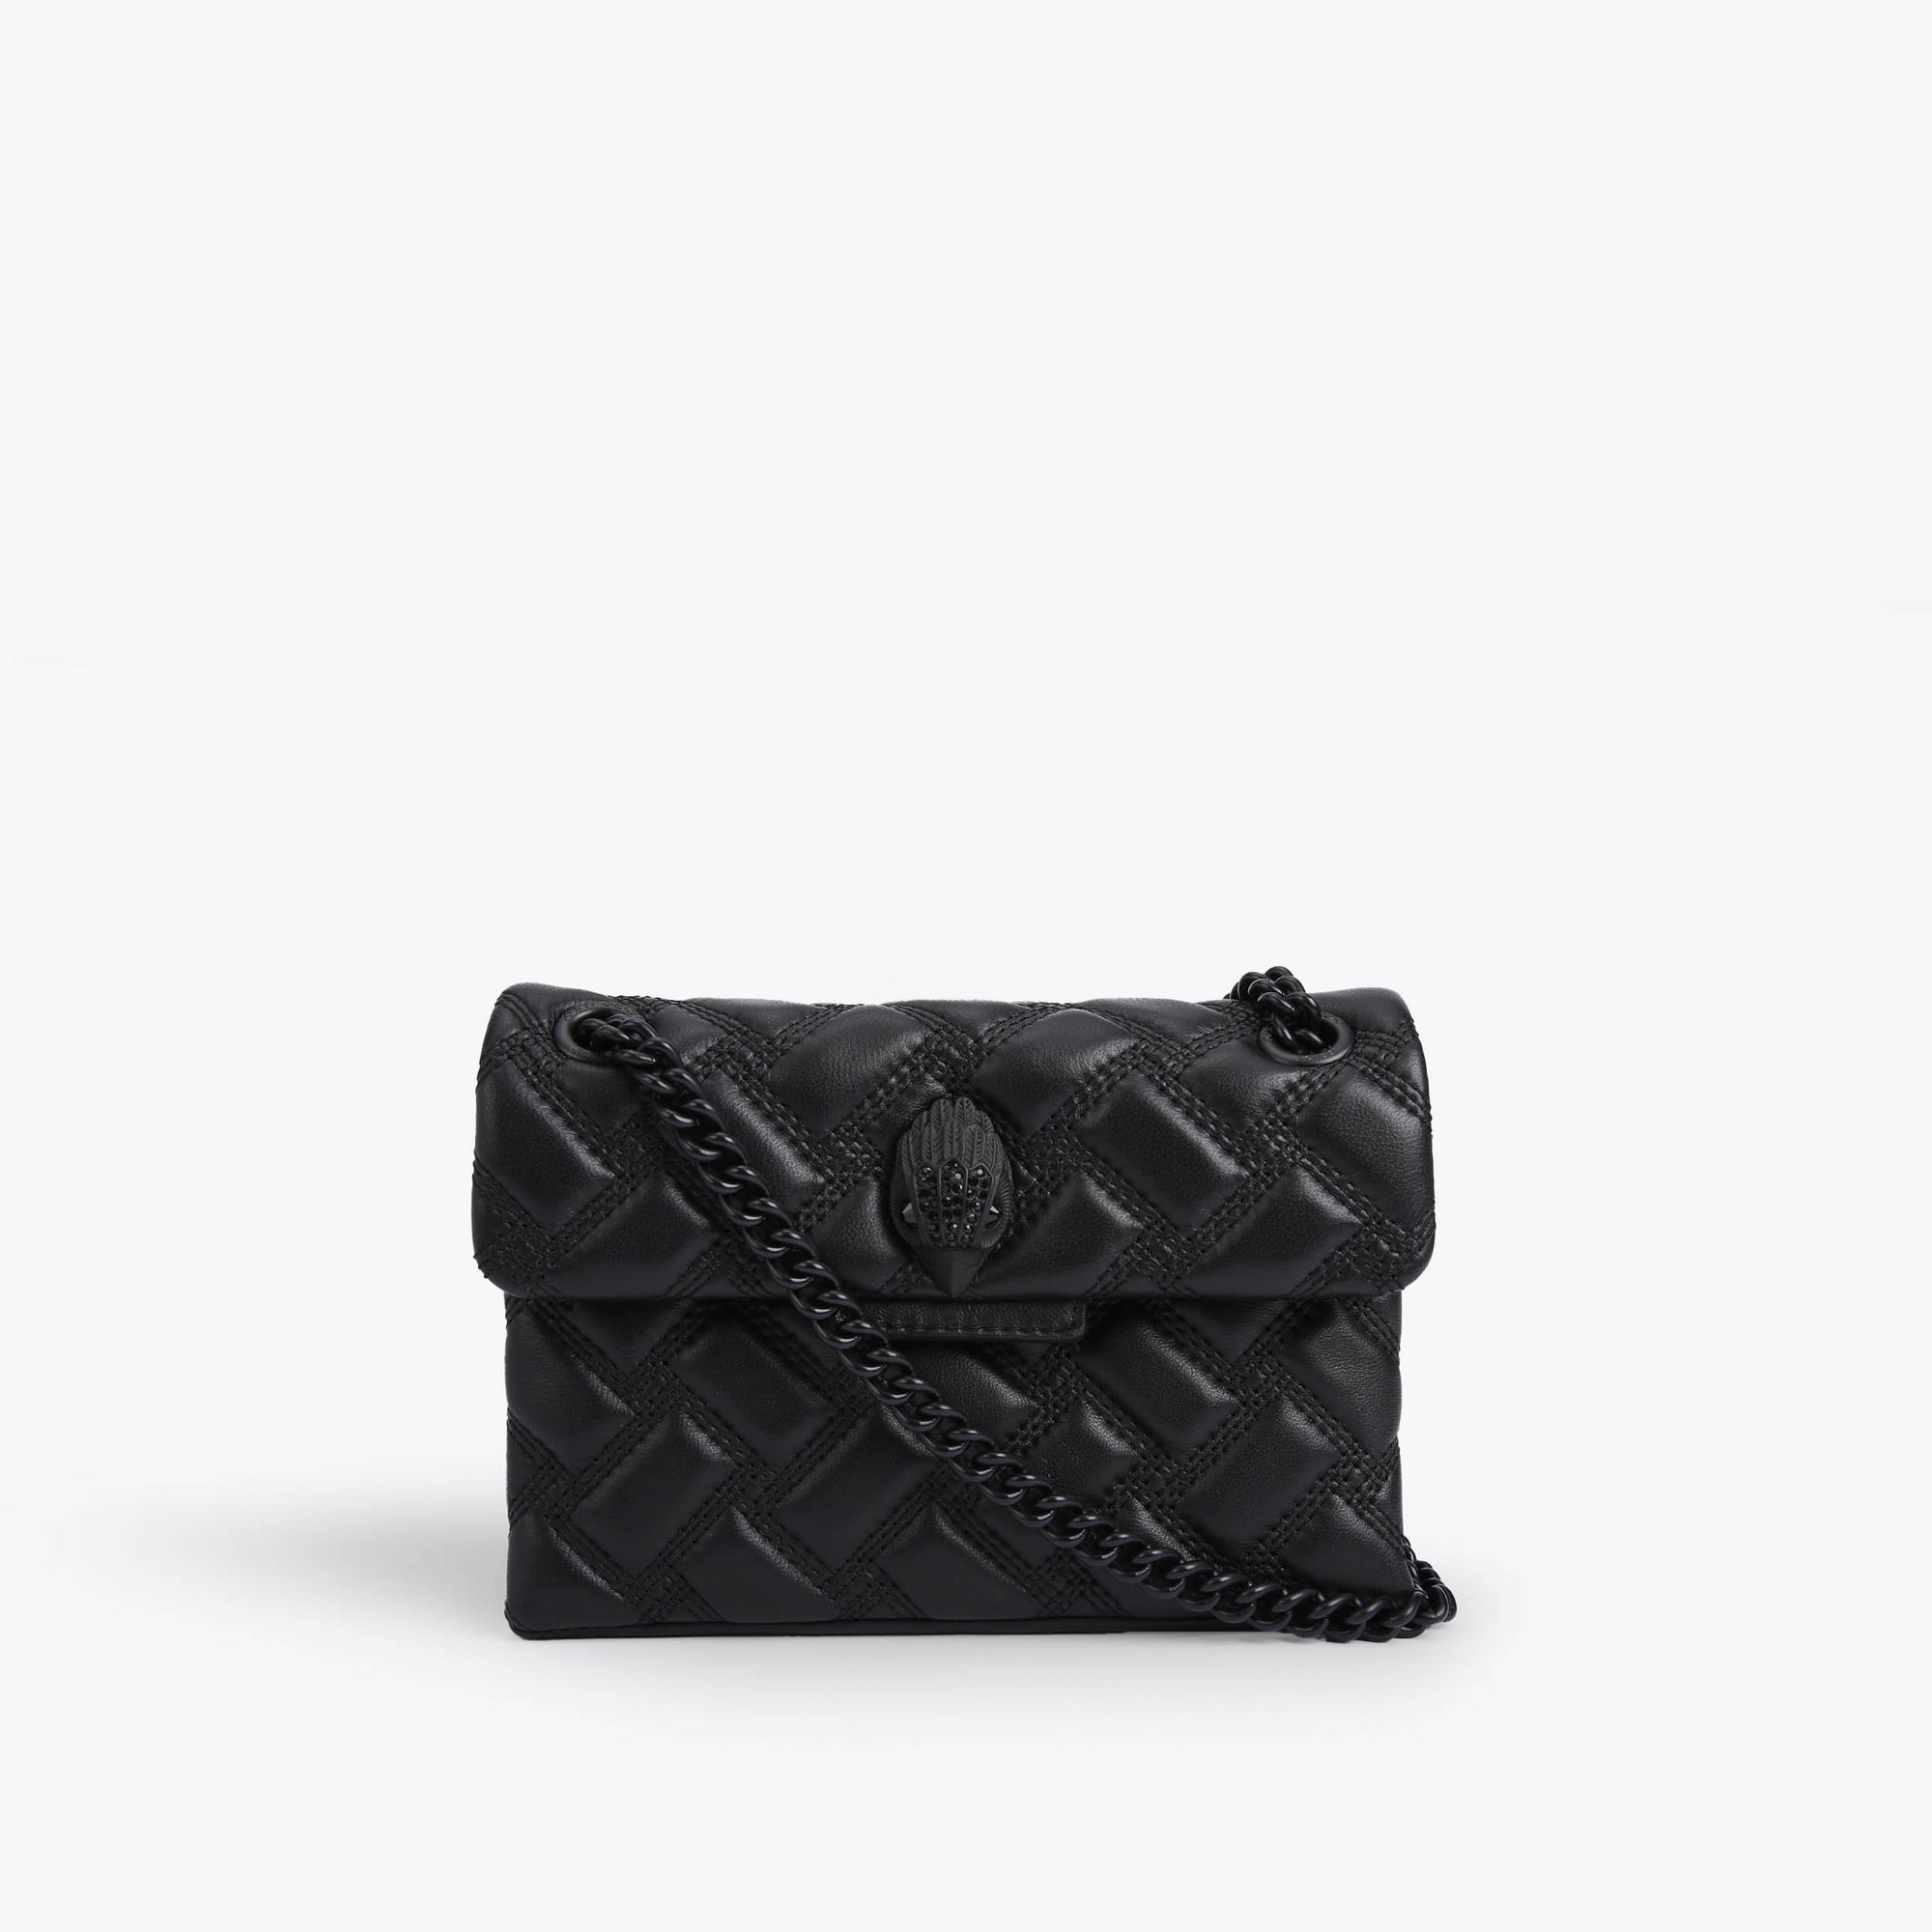 Kurt Geiger London Kensington Drench Quilted Leather Small Camera